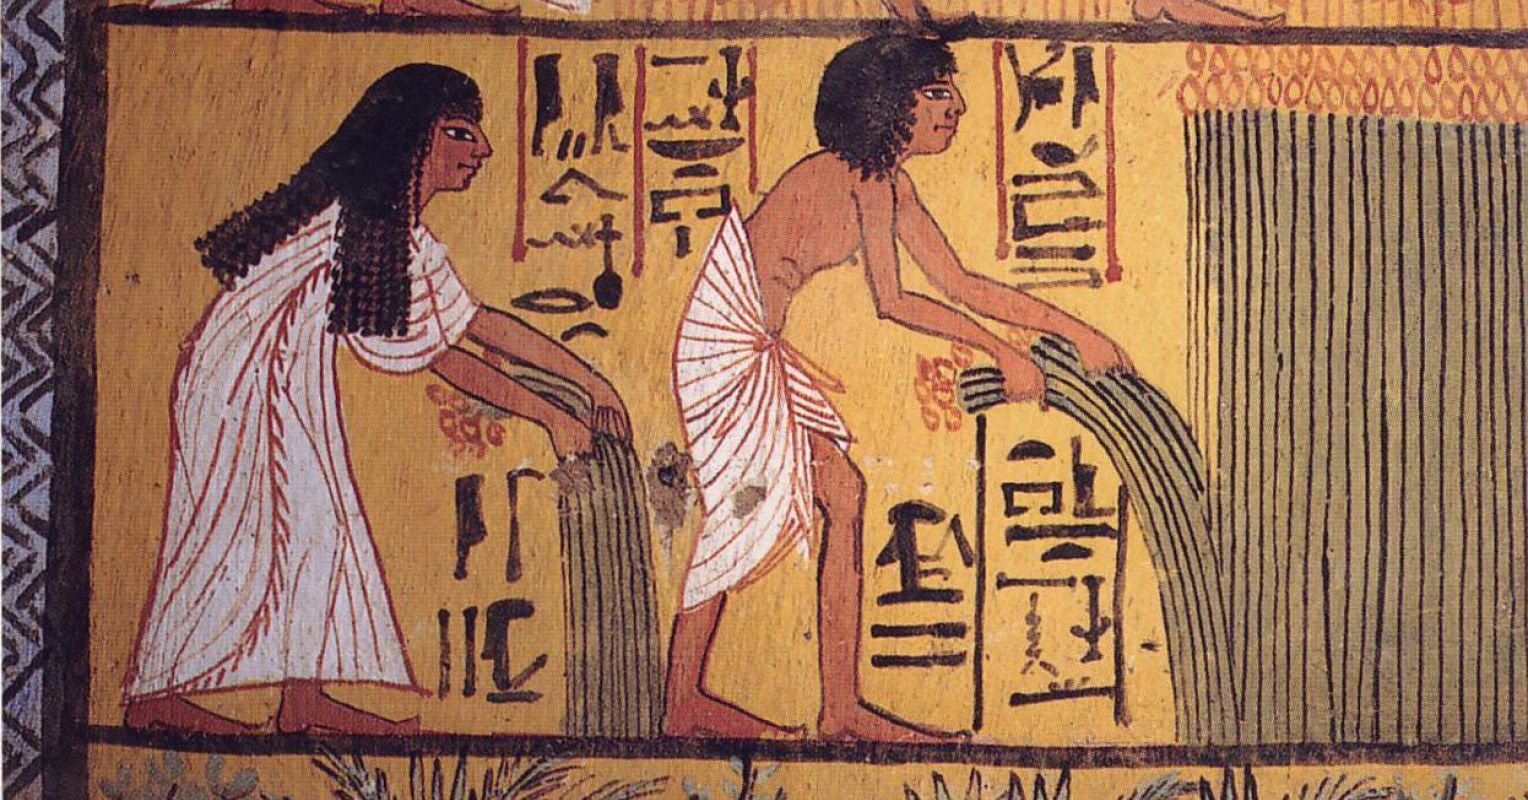 how were egyptian men and women created according to ancient egyptian mythology